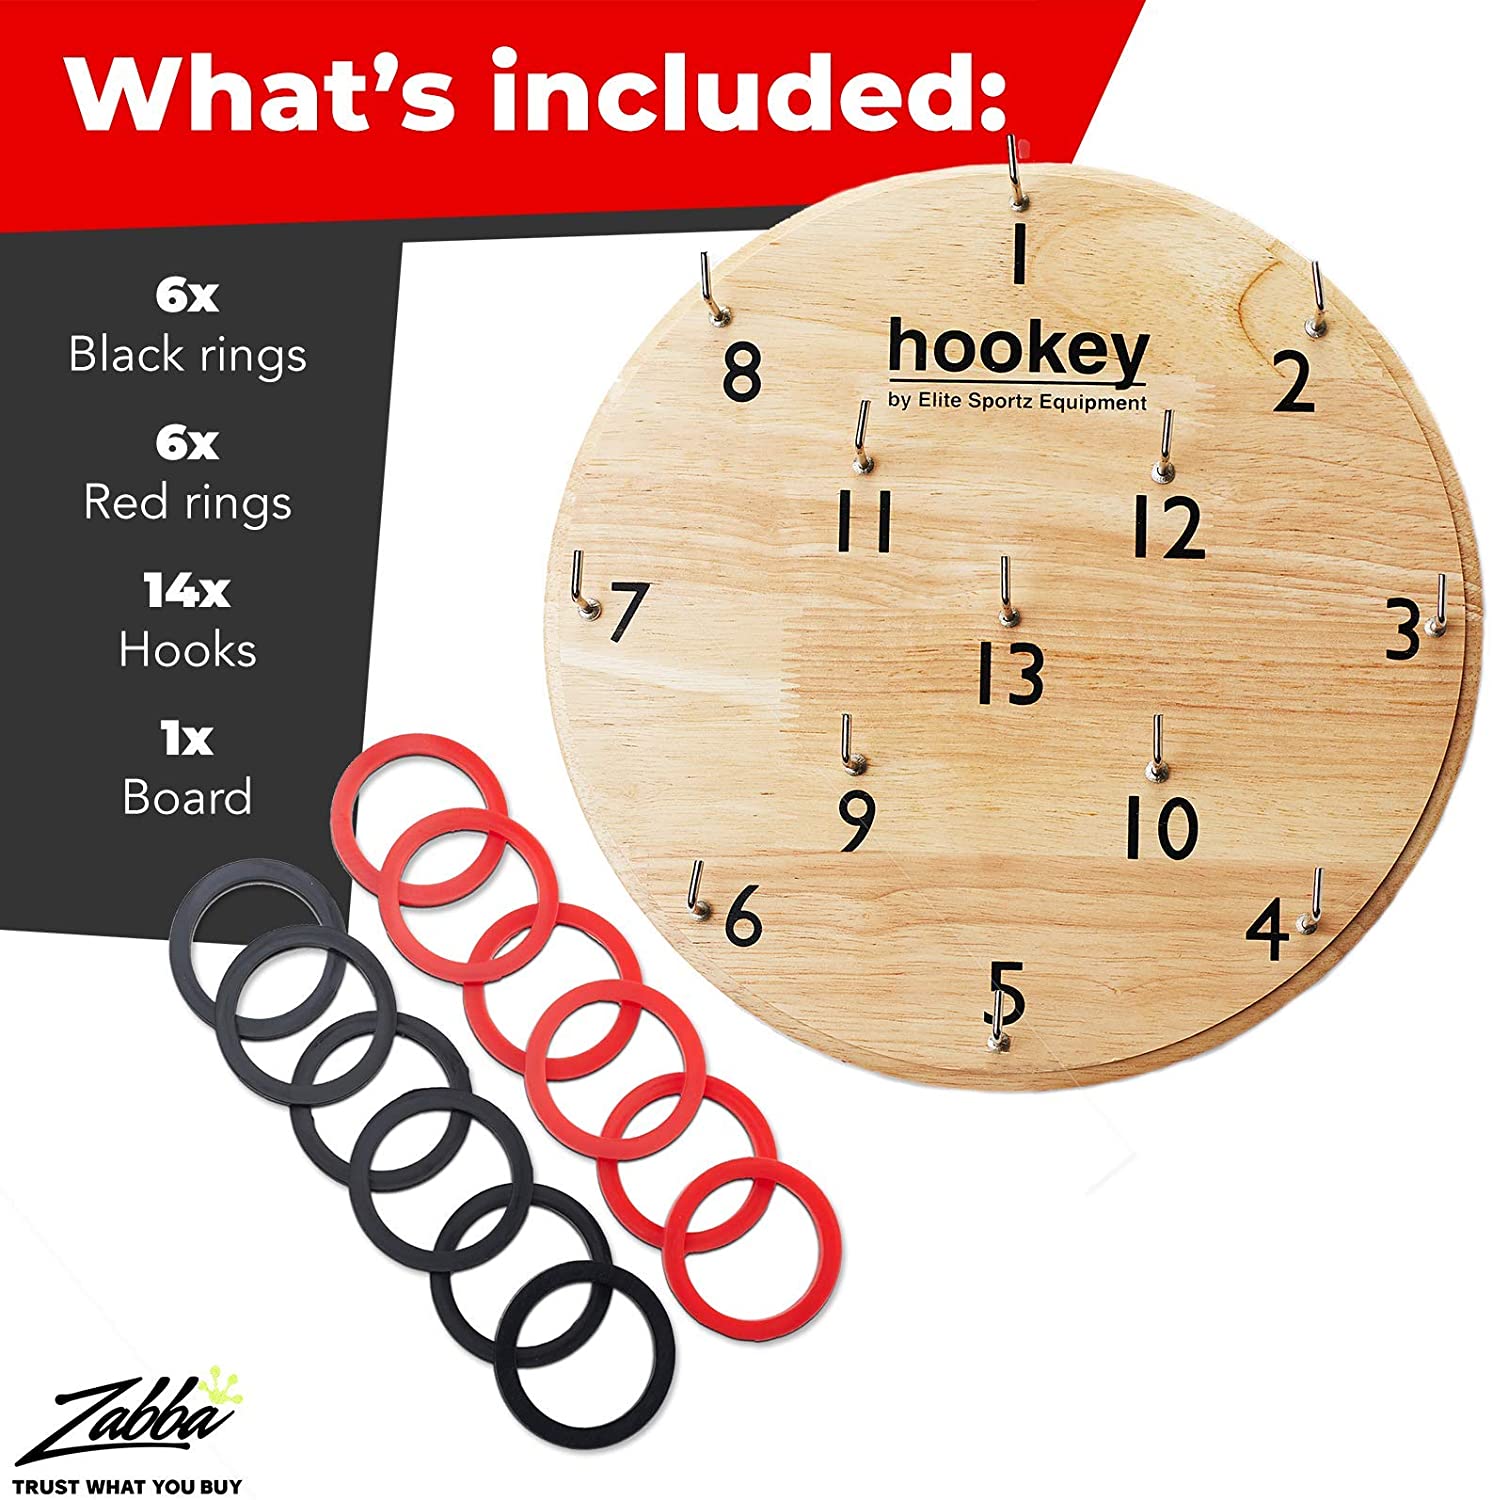 Elite Sportz Gifts for Men, Teens and Safe Games for Kids - Our Beautifully Finished Hookey Games Make Great for All. Easy Set-Up, Simply Hang and Play - image 4 of 9